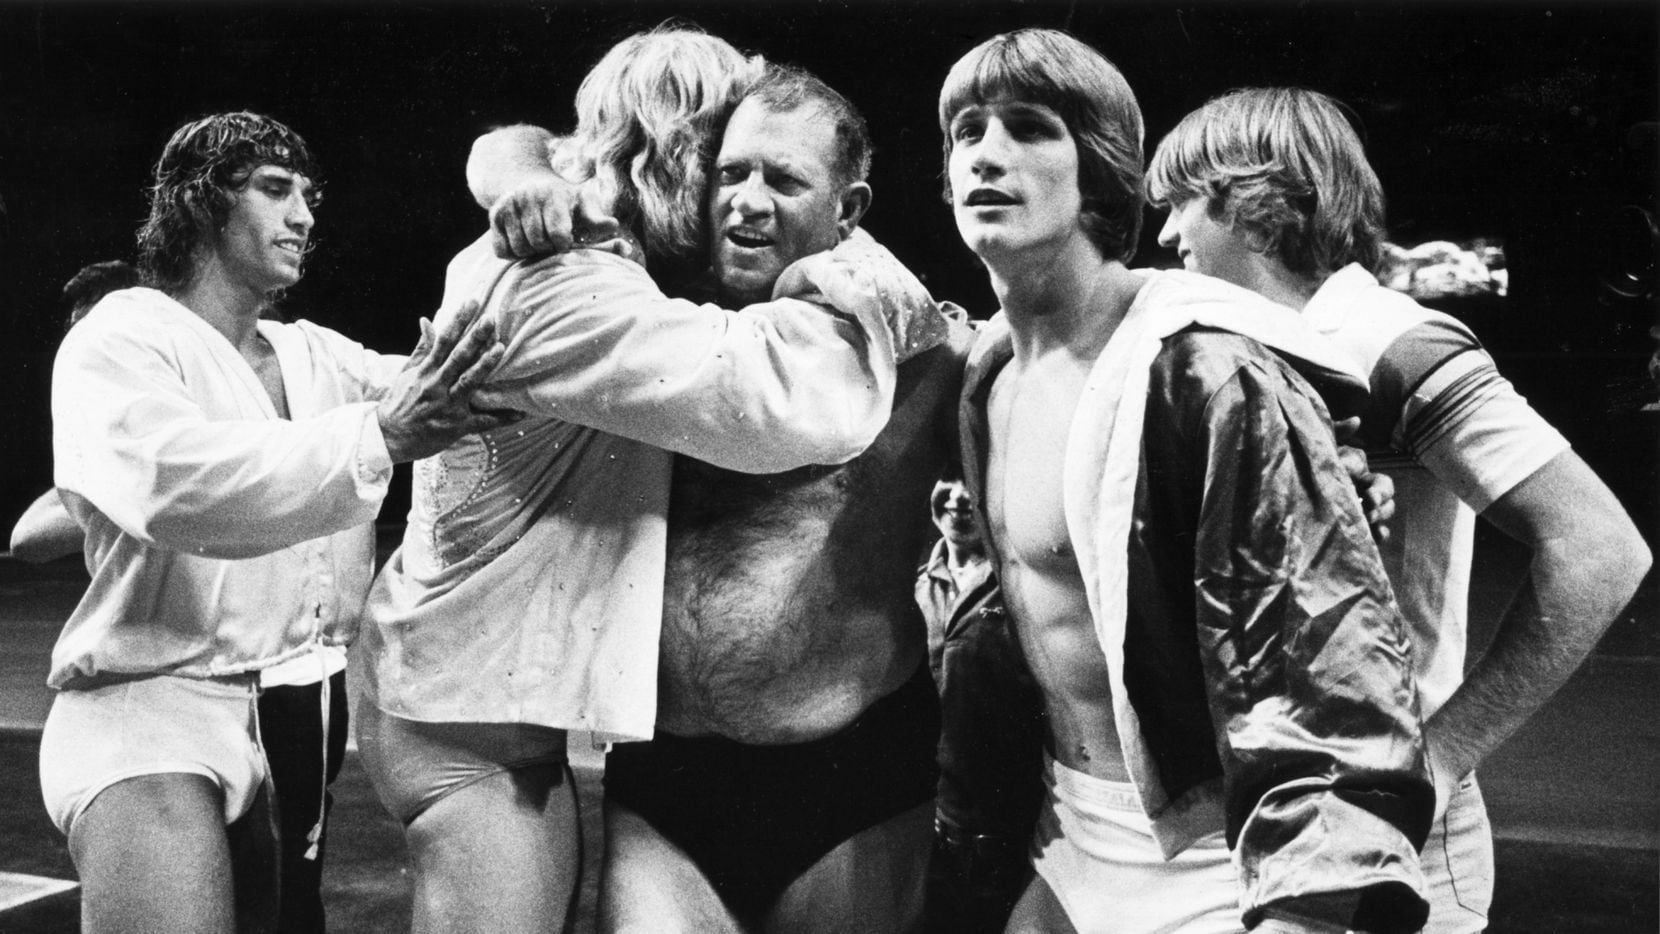 Fritz (center), the father of the Von Erich family of wrestling, appears with his sons Kerry...